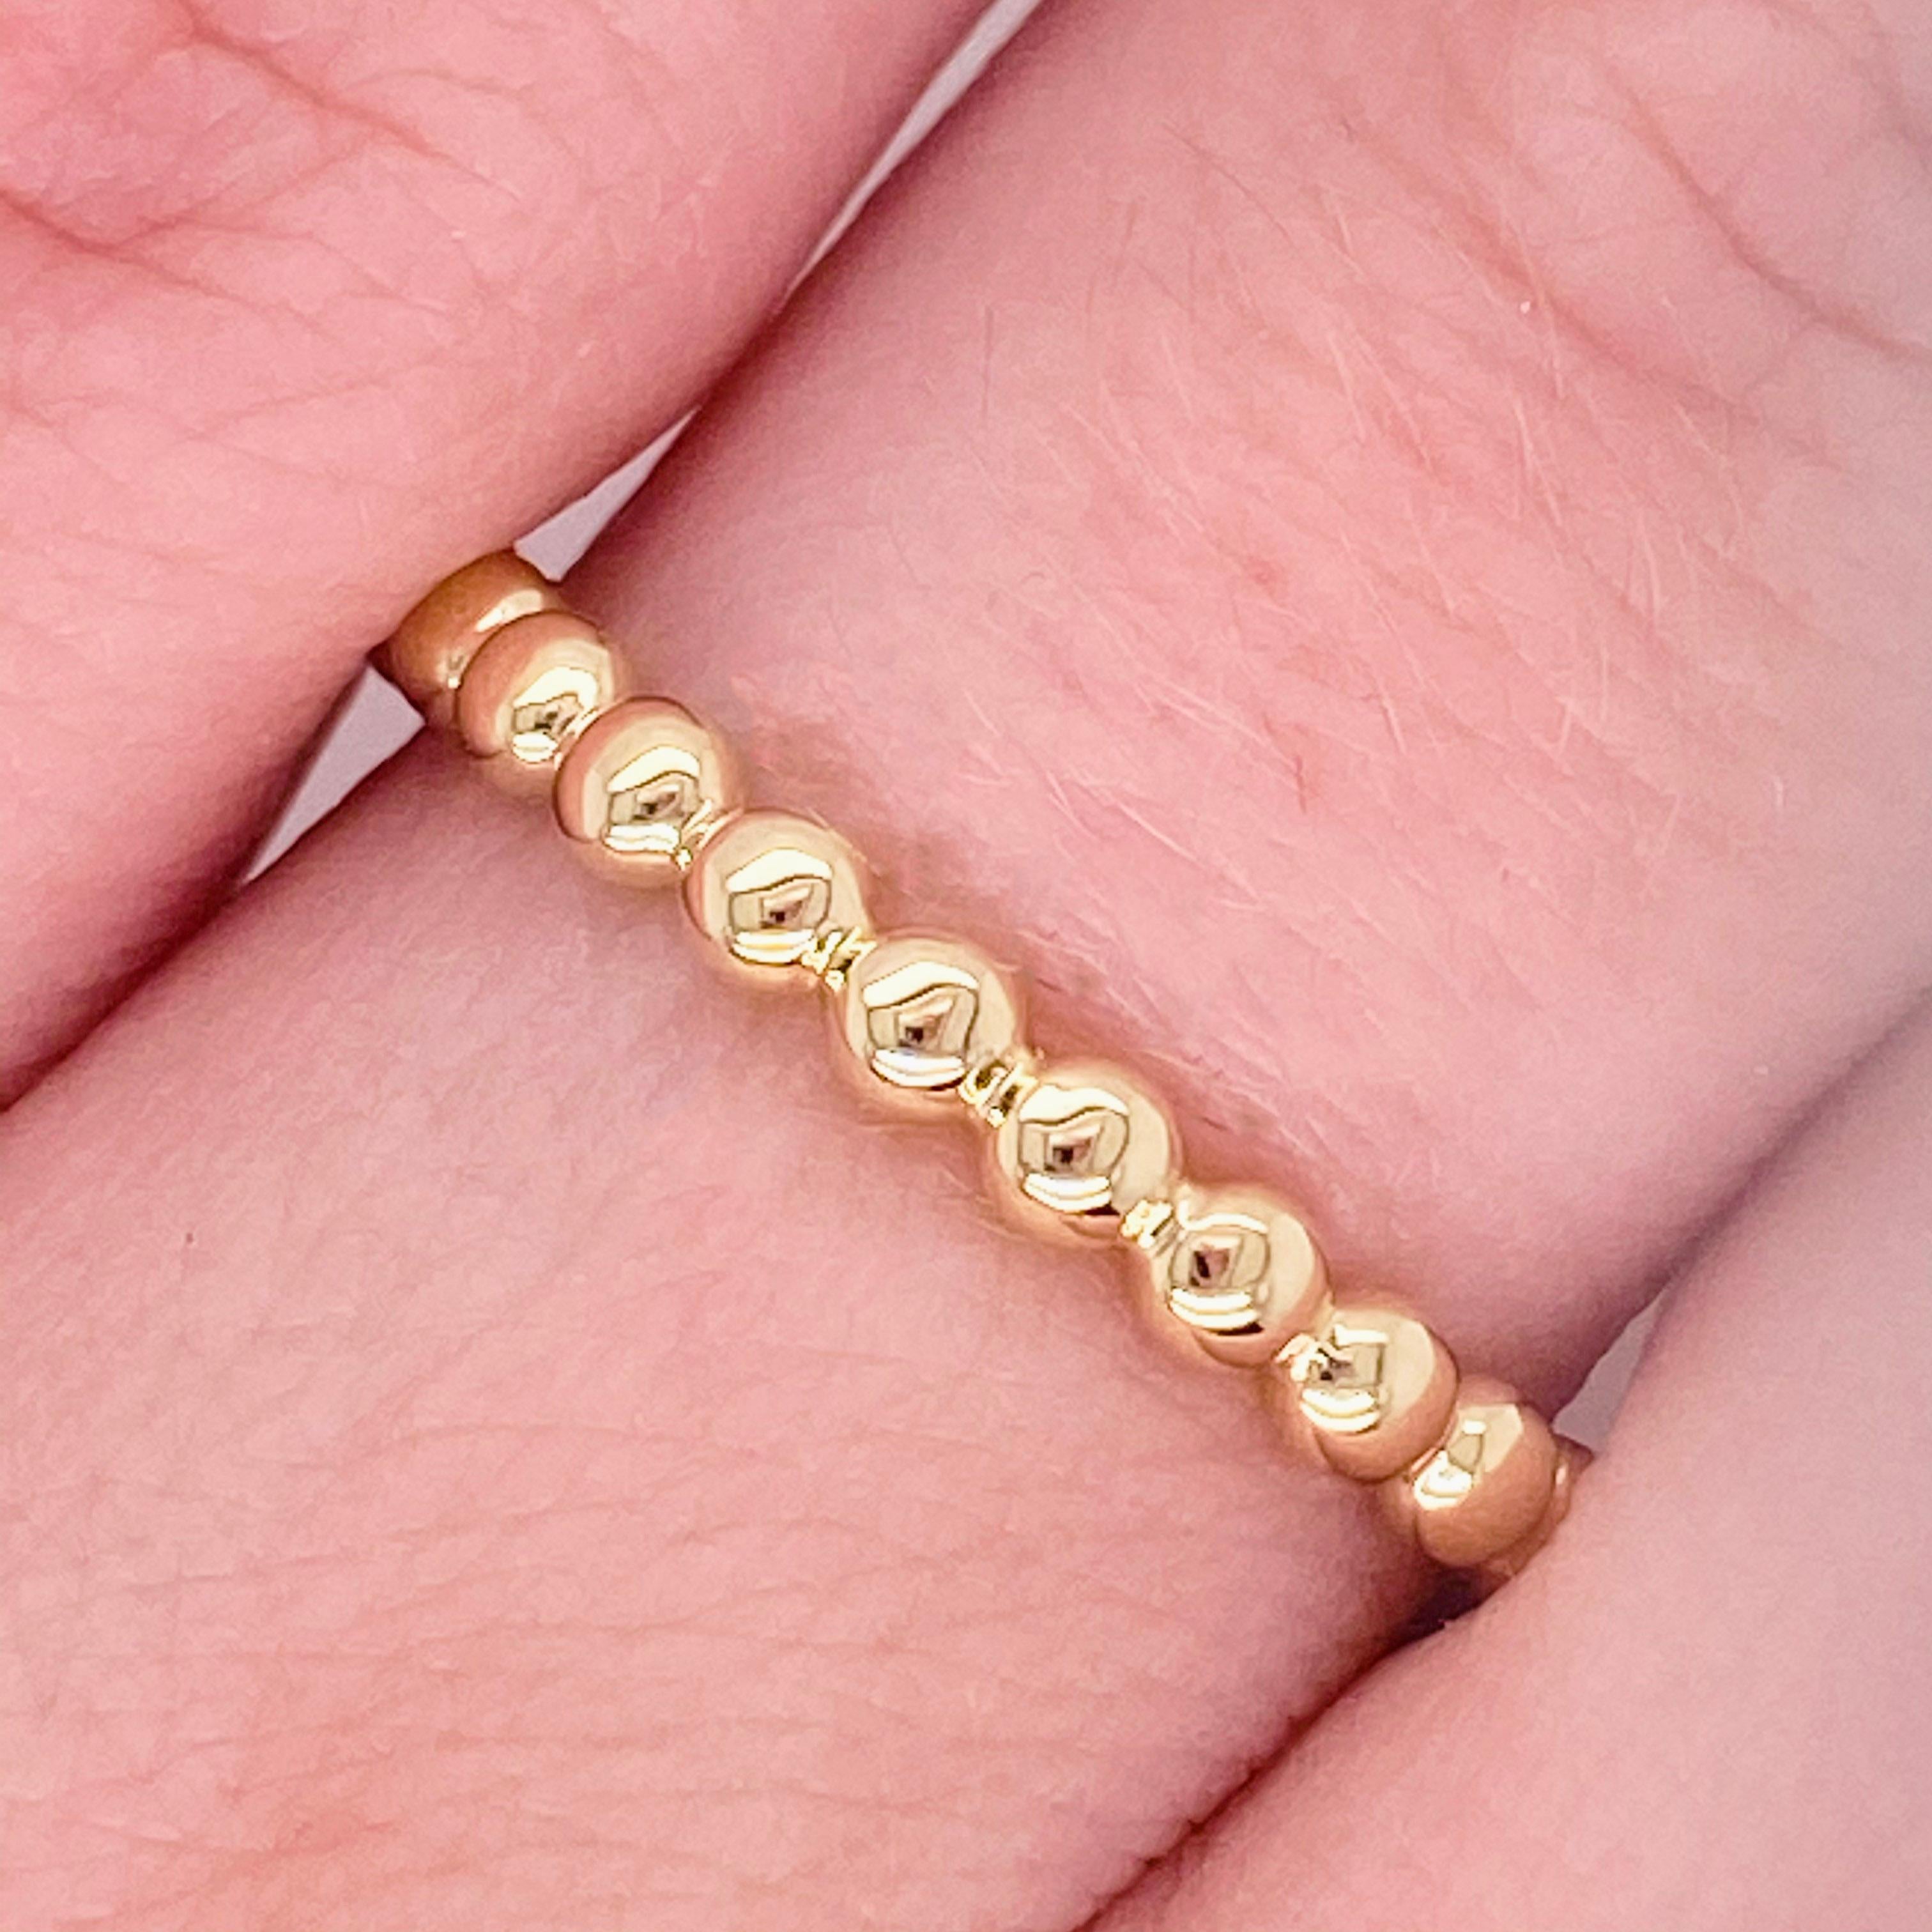 This lovely band has a beautiful beaded design! Accented by the lovely 14 karat yellow gold, this ring is an amazing fashion band and stackable band!  This pairs well with most engagement rings and wedding bands as well!  Treat yourself or your